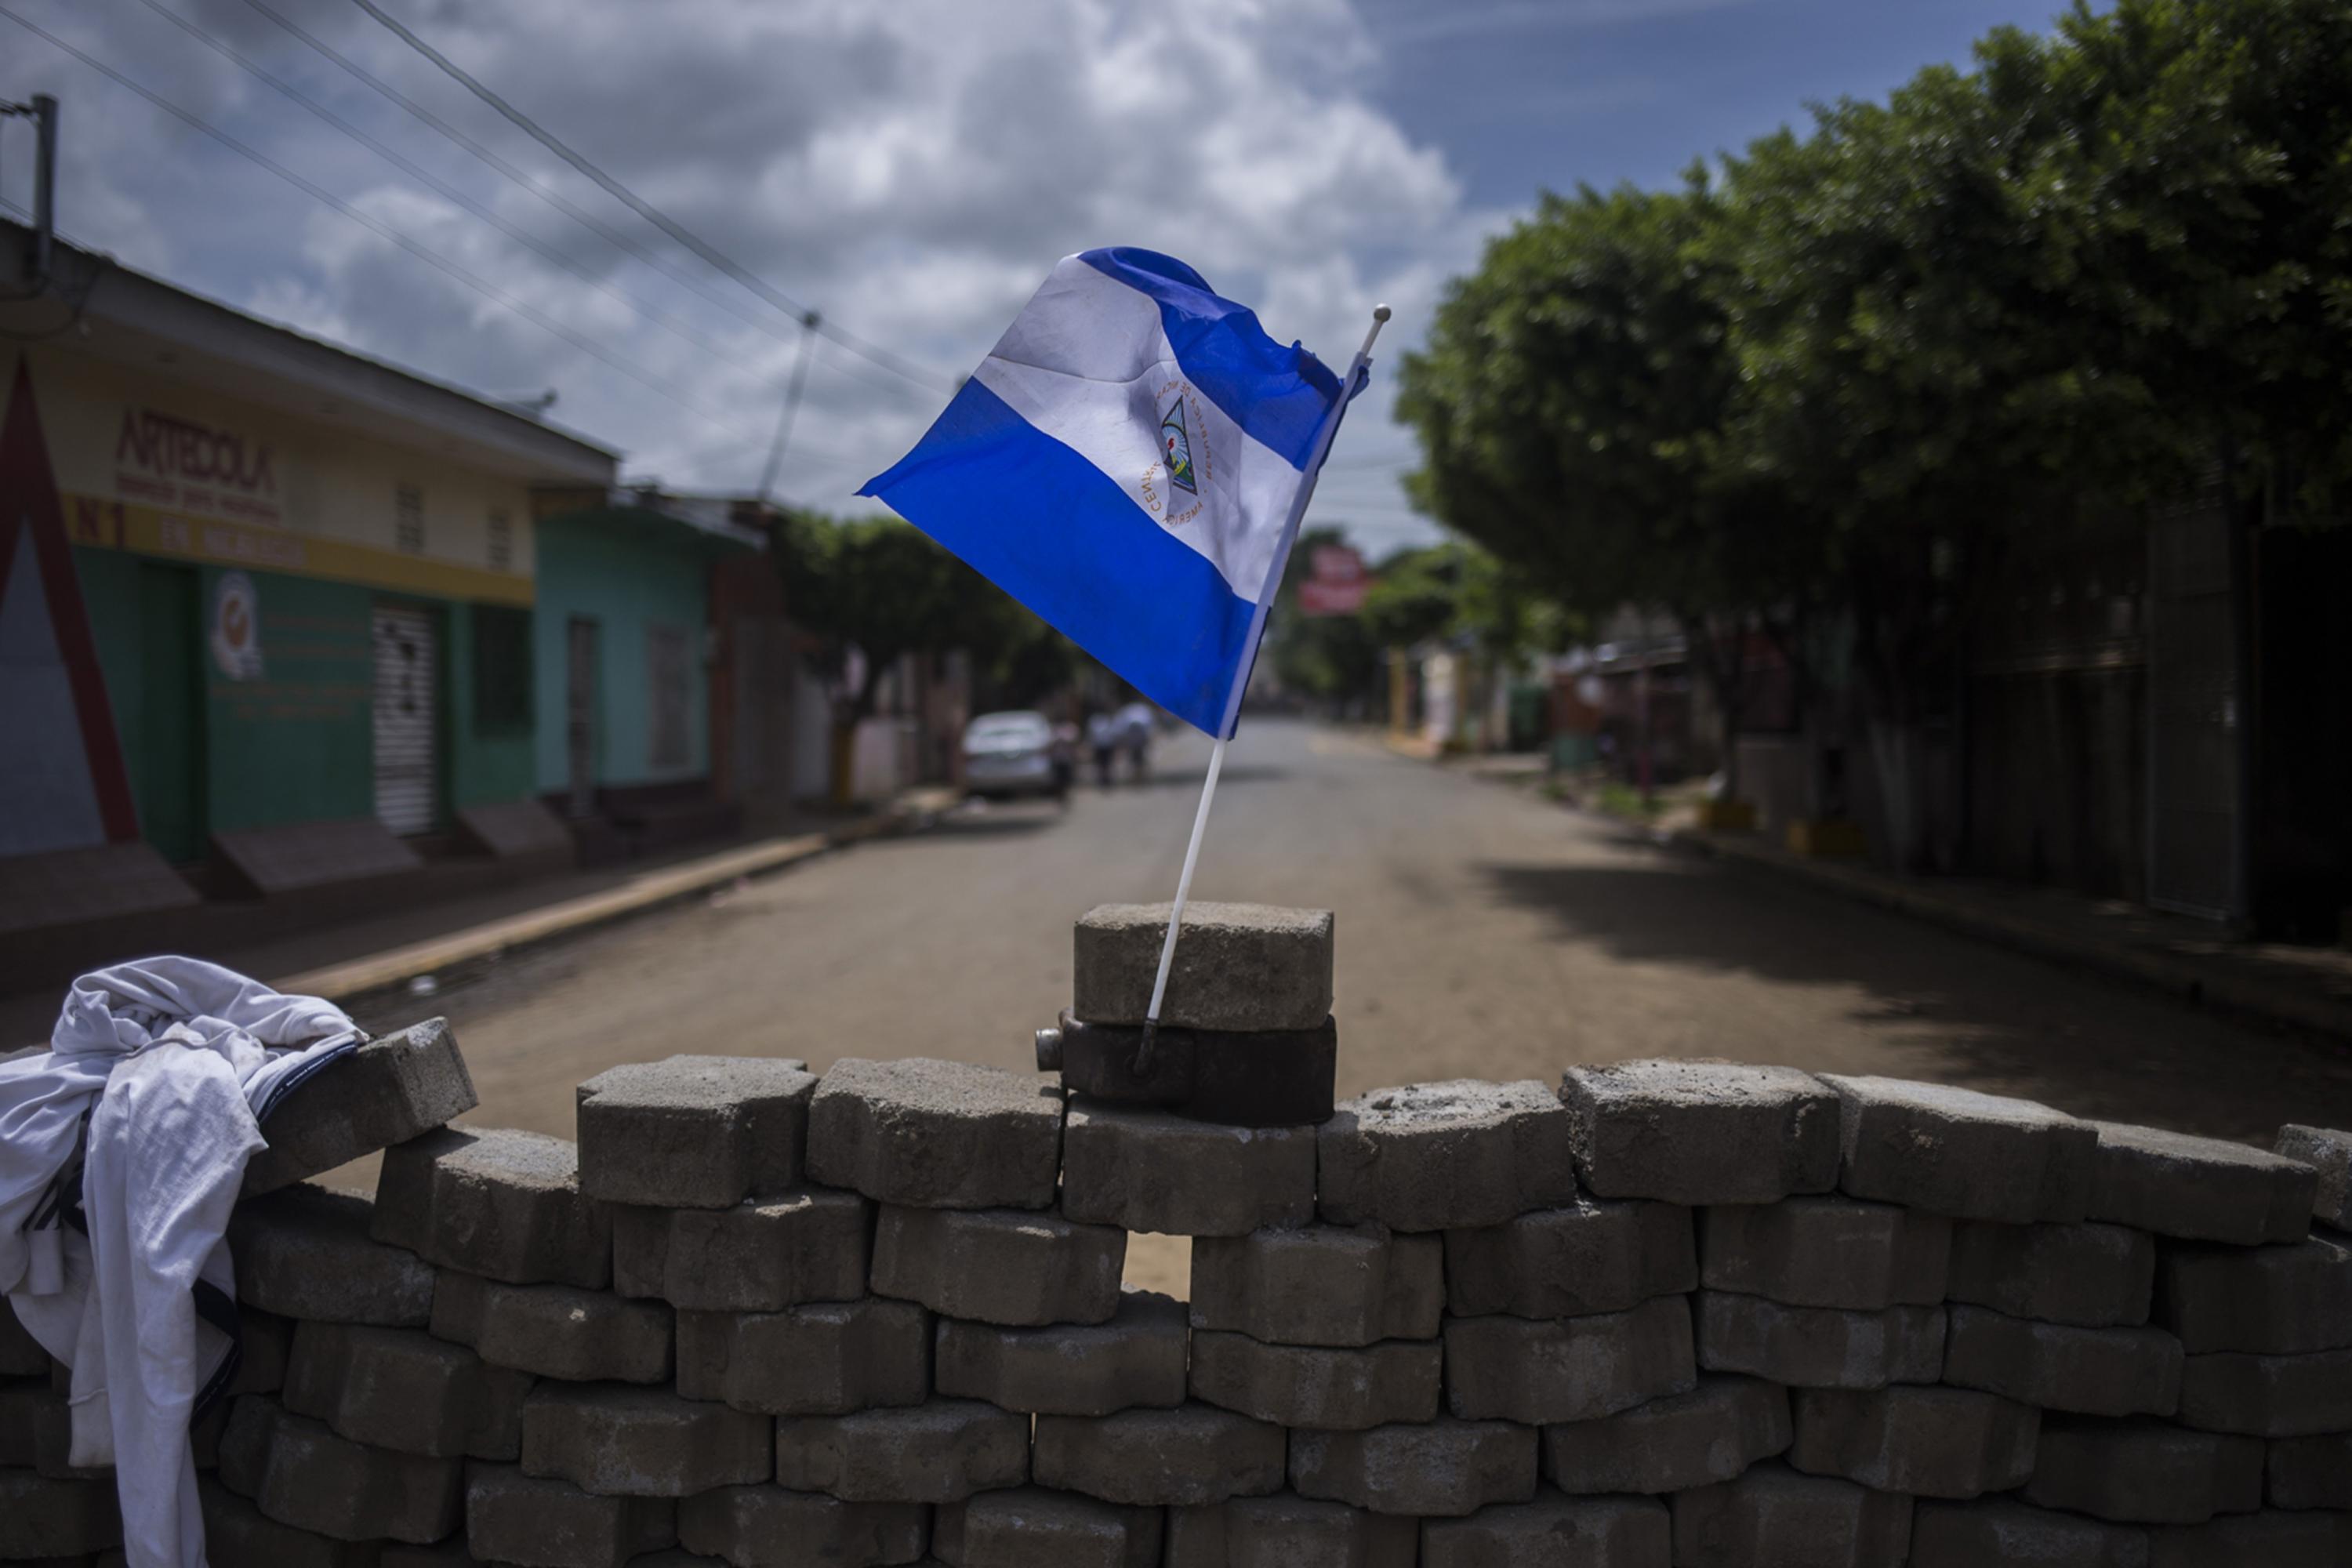 In the city of Masaya, some 30 kilometers from Managua, each neighborhood seized control of its streets in the first weeks of the 2018 uprising, erecting barricades to prevent the police and riot squads from entering. Photo Víctor Peña